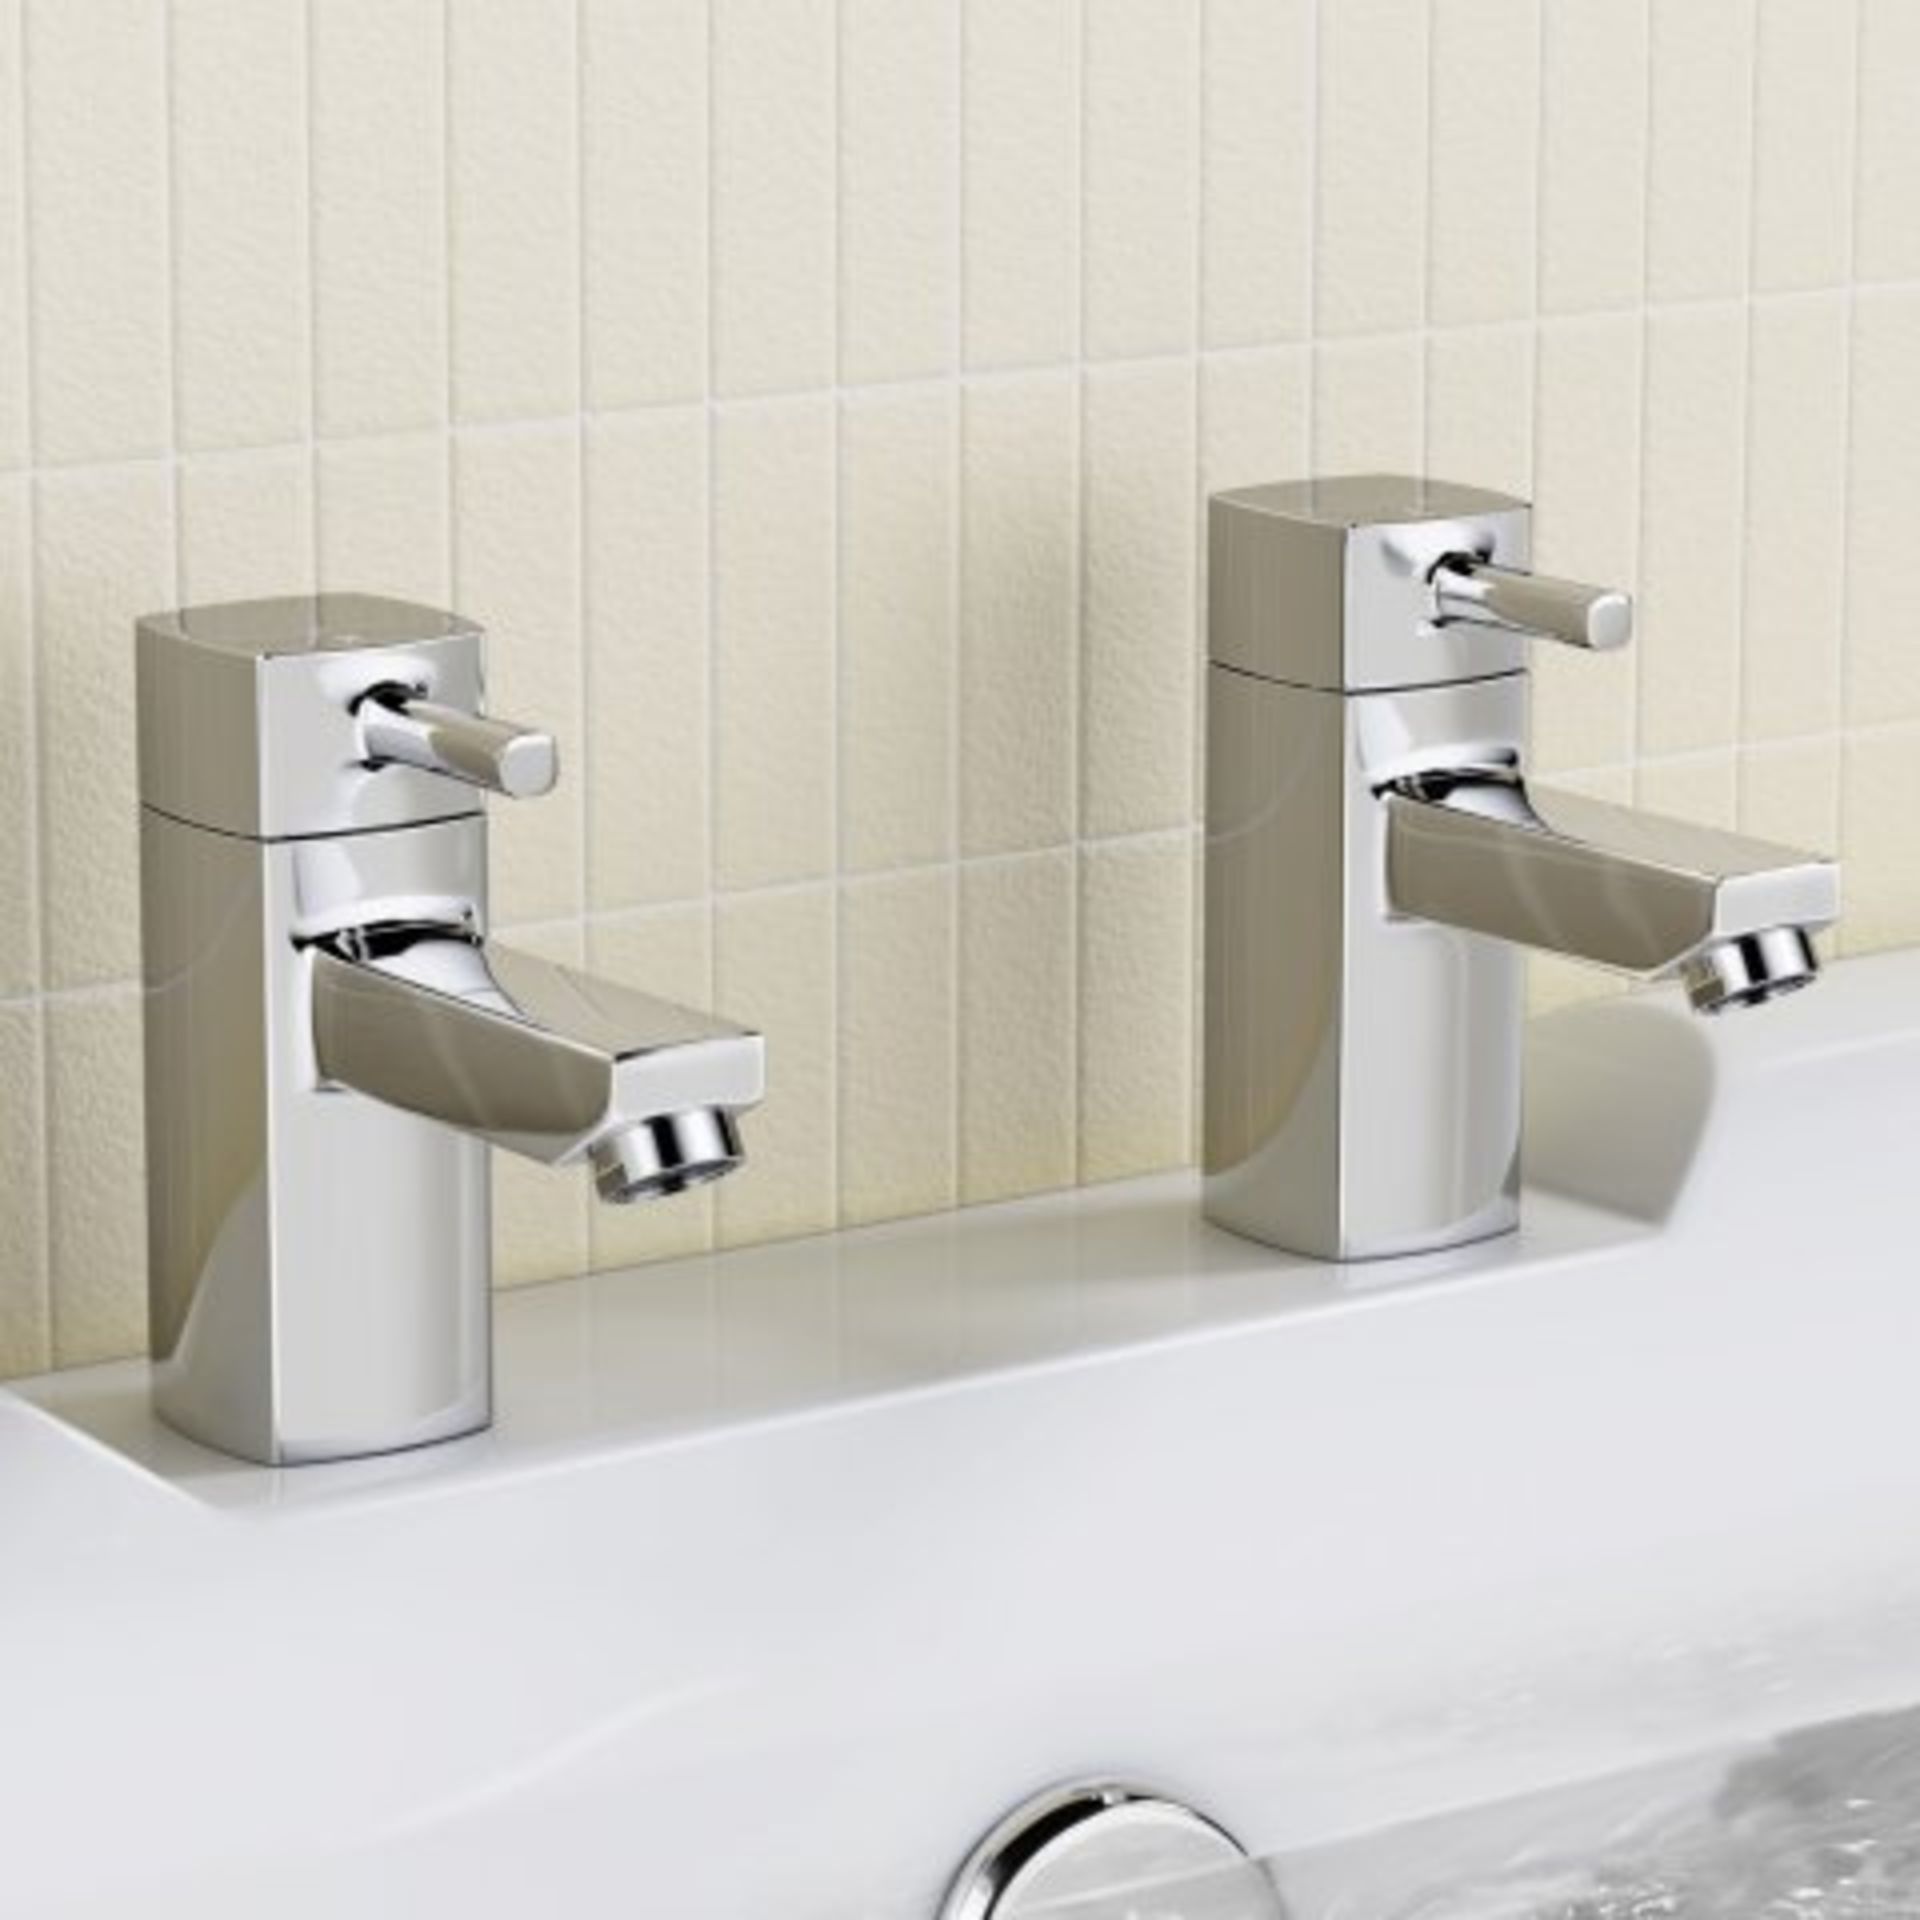 (W203) Ivela Hot and Cold Bath Taps Presenting a contemporary design, this solid brass tap has